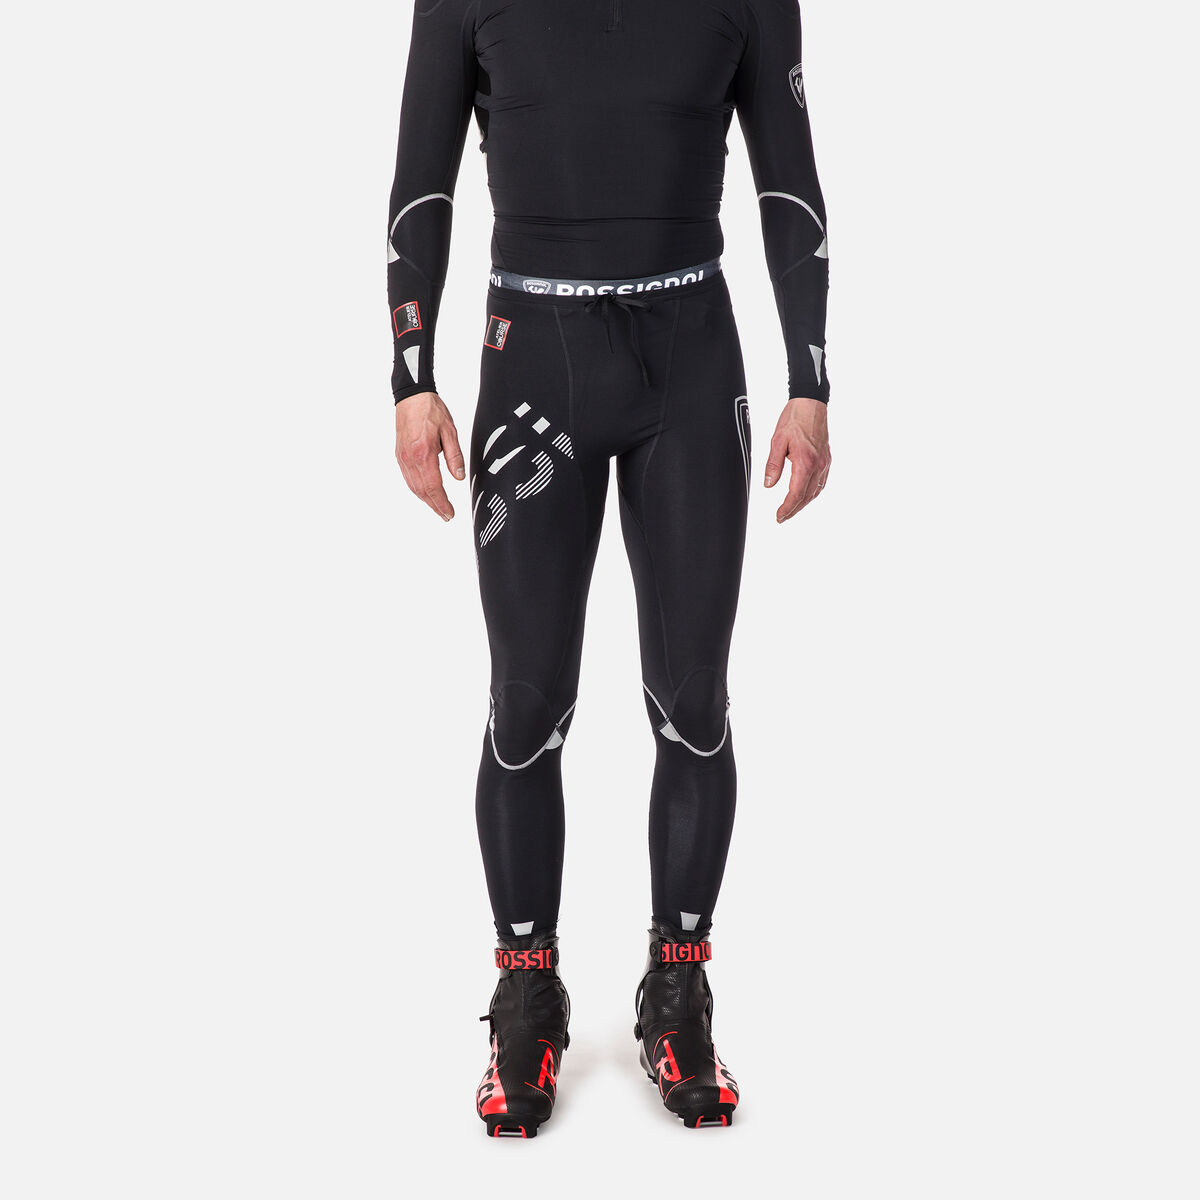 Rossignol Infini Compression Race Tights Onyx Grey Base layer